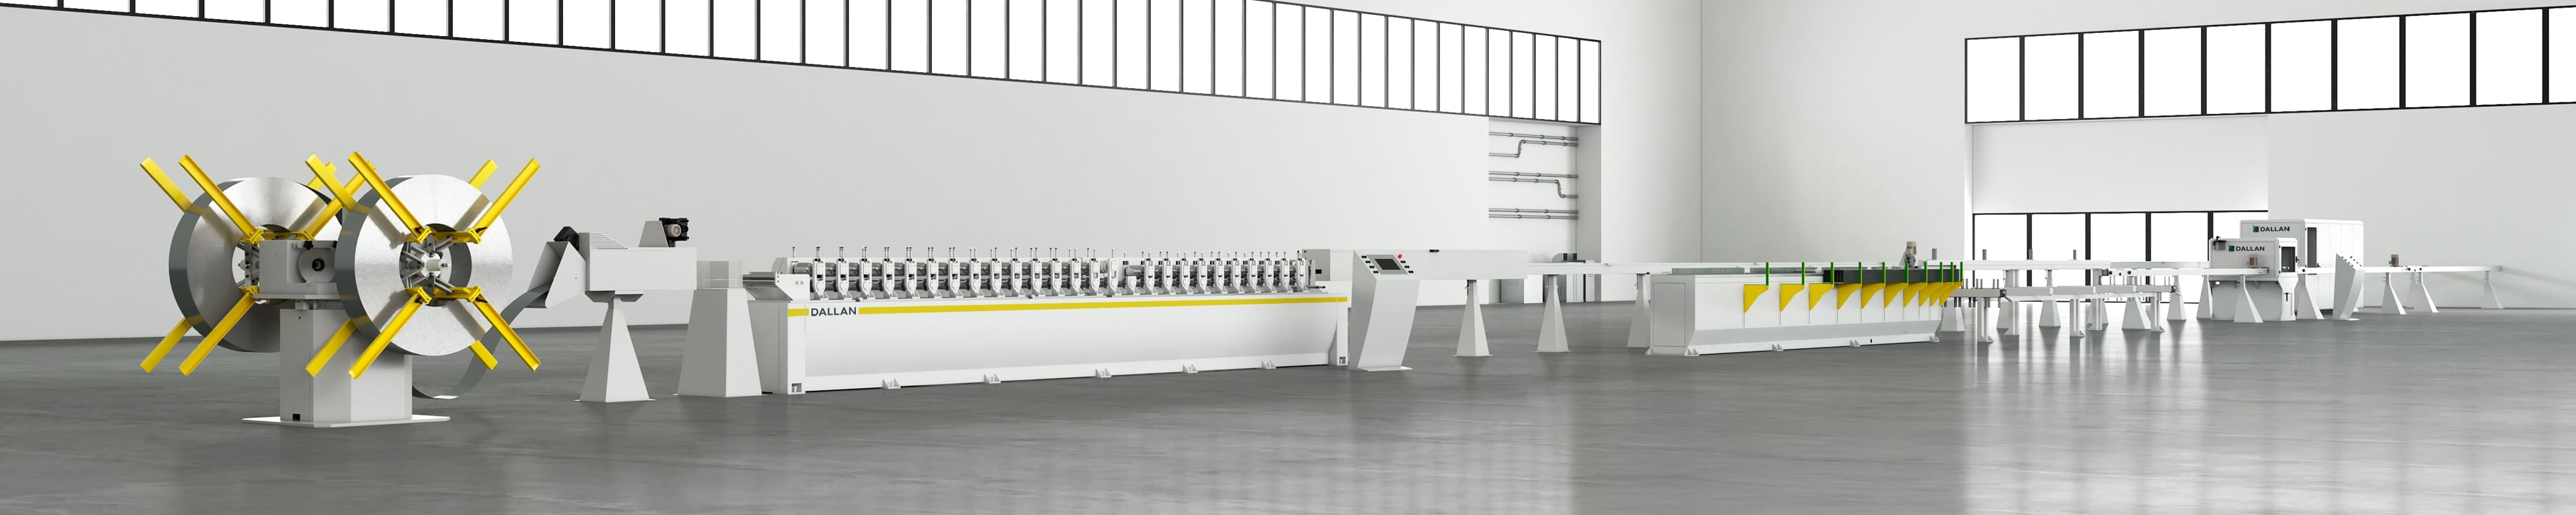 DALLAN D610: roll former for roller shutter profiles up to 60 m/min